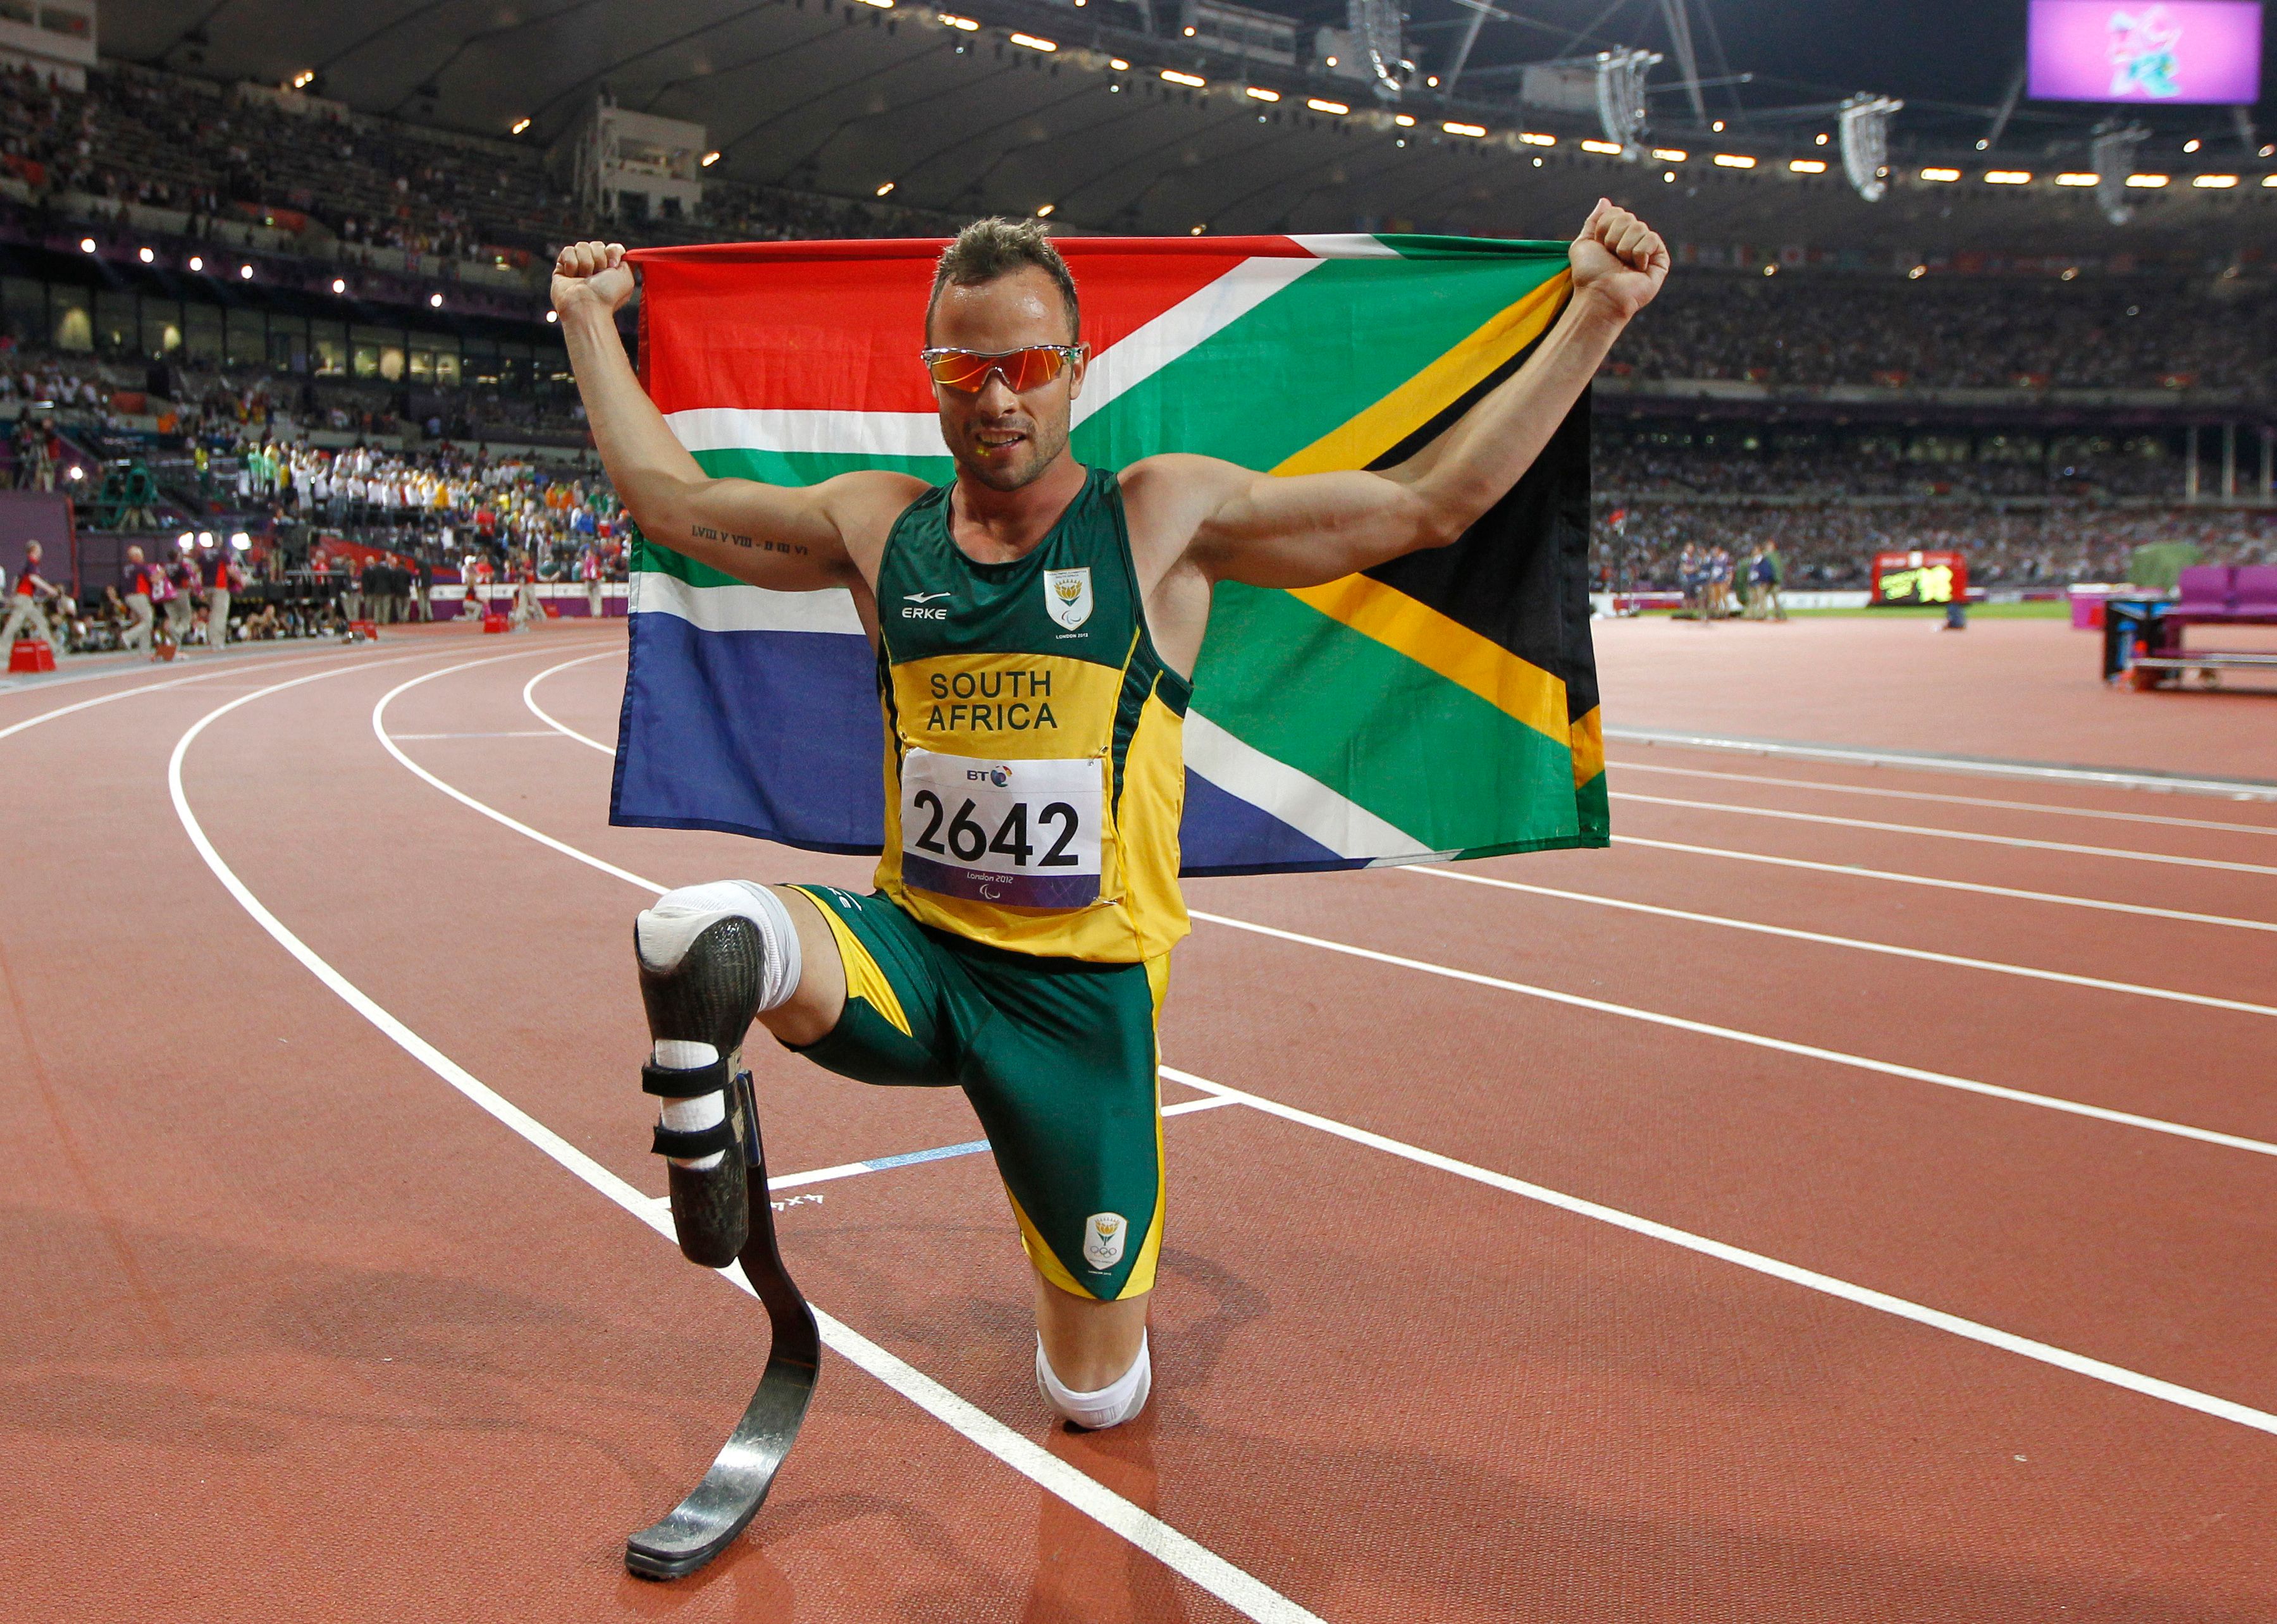 Pistorius won numerous medals in international competition for South Afrca